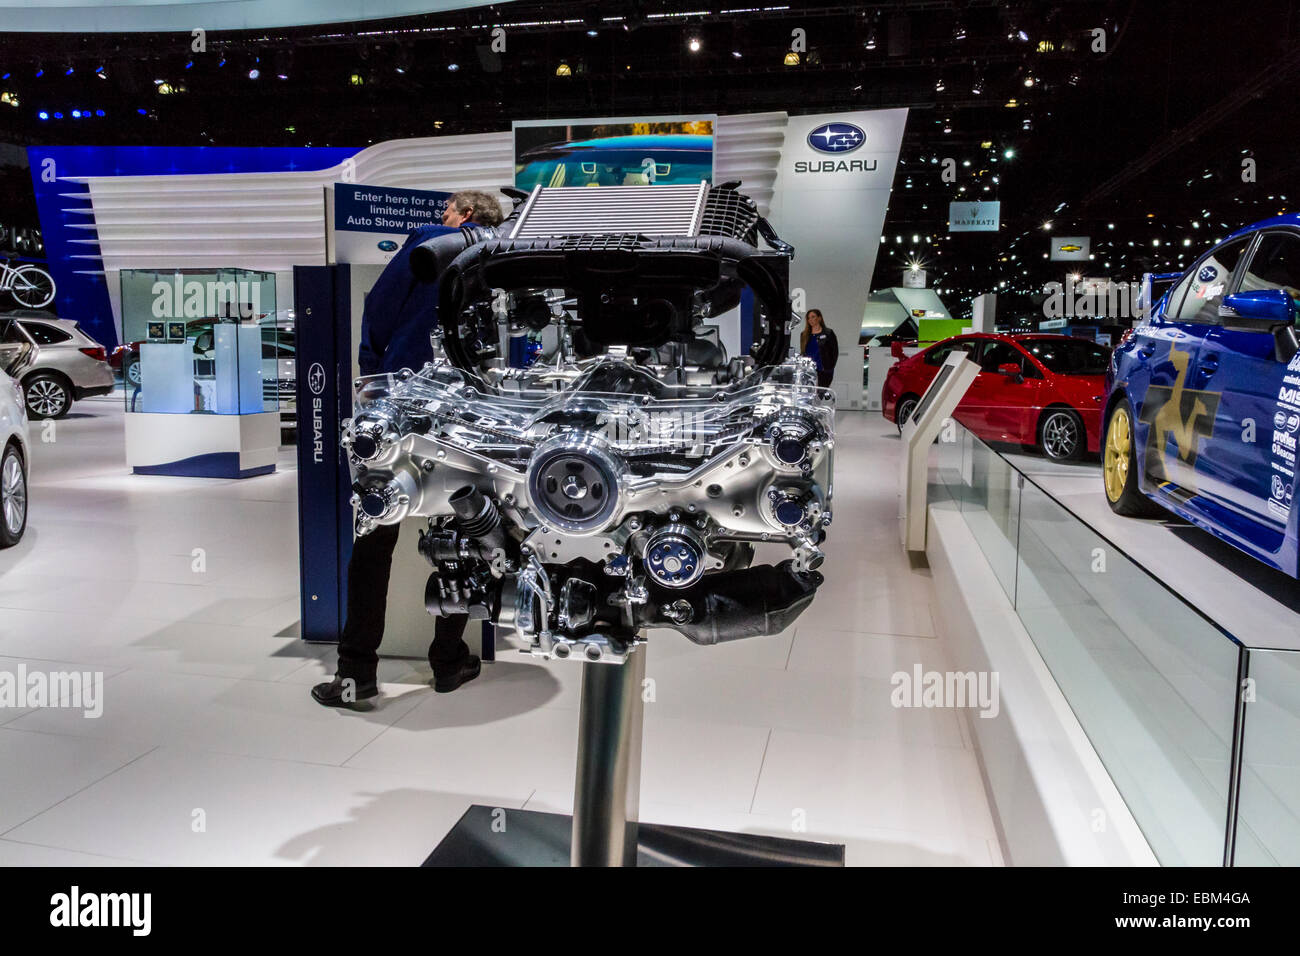 A cutaway Subaru flat four engine at the 2014 Los Angeles Auto Show Stock Photo